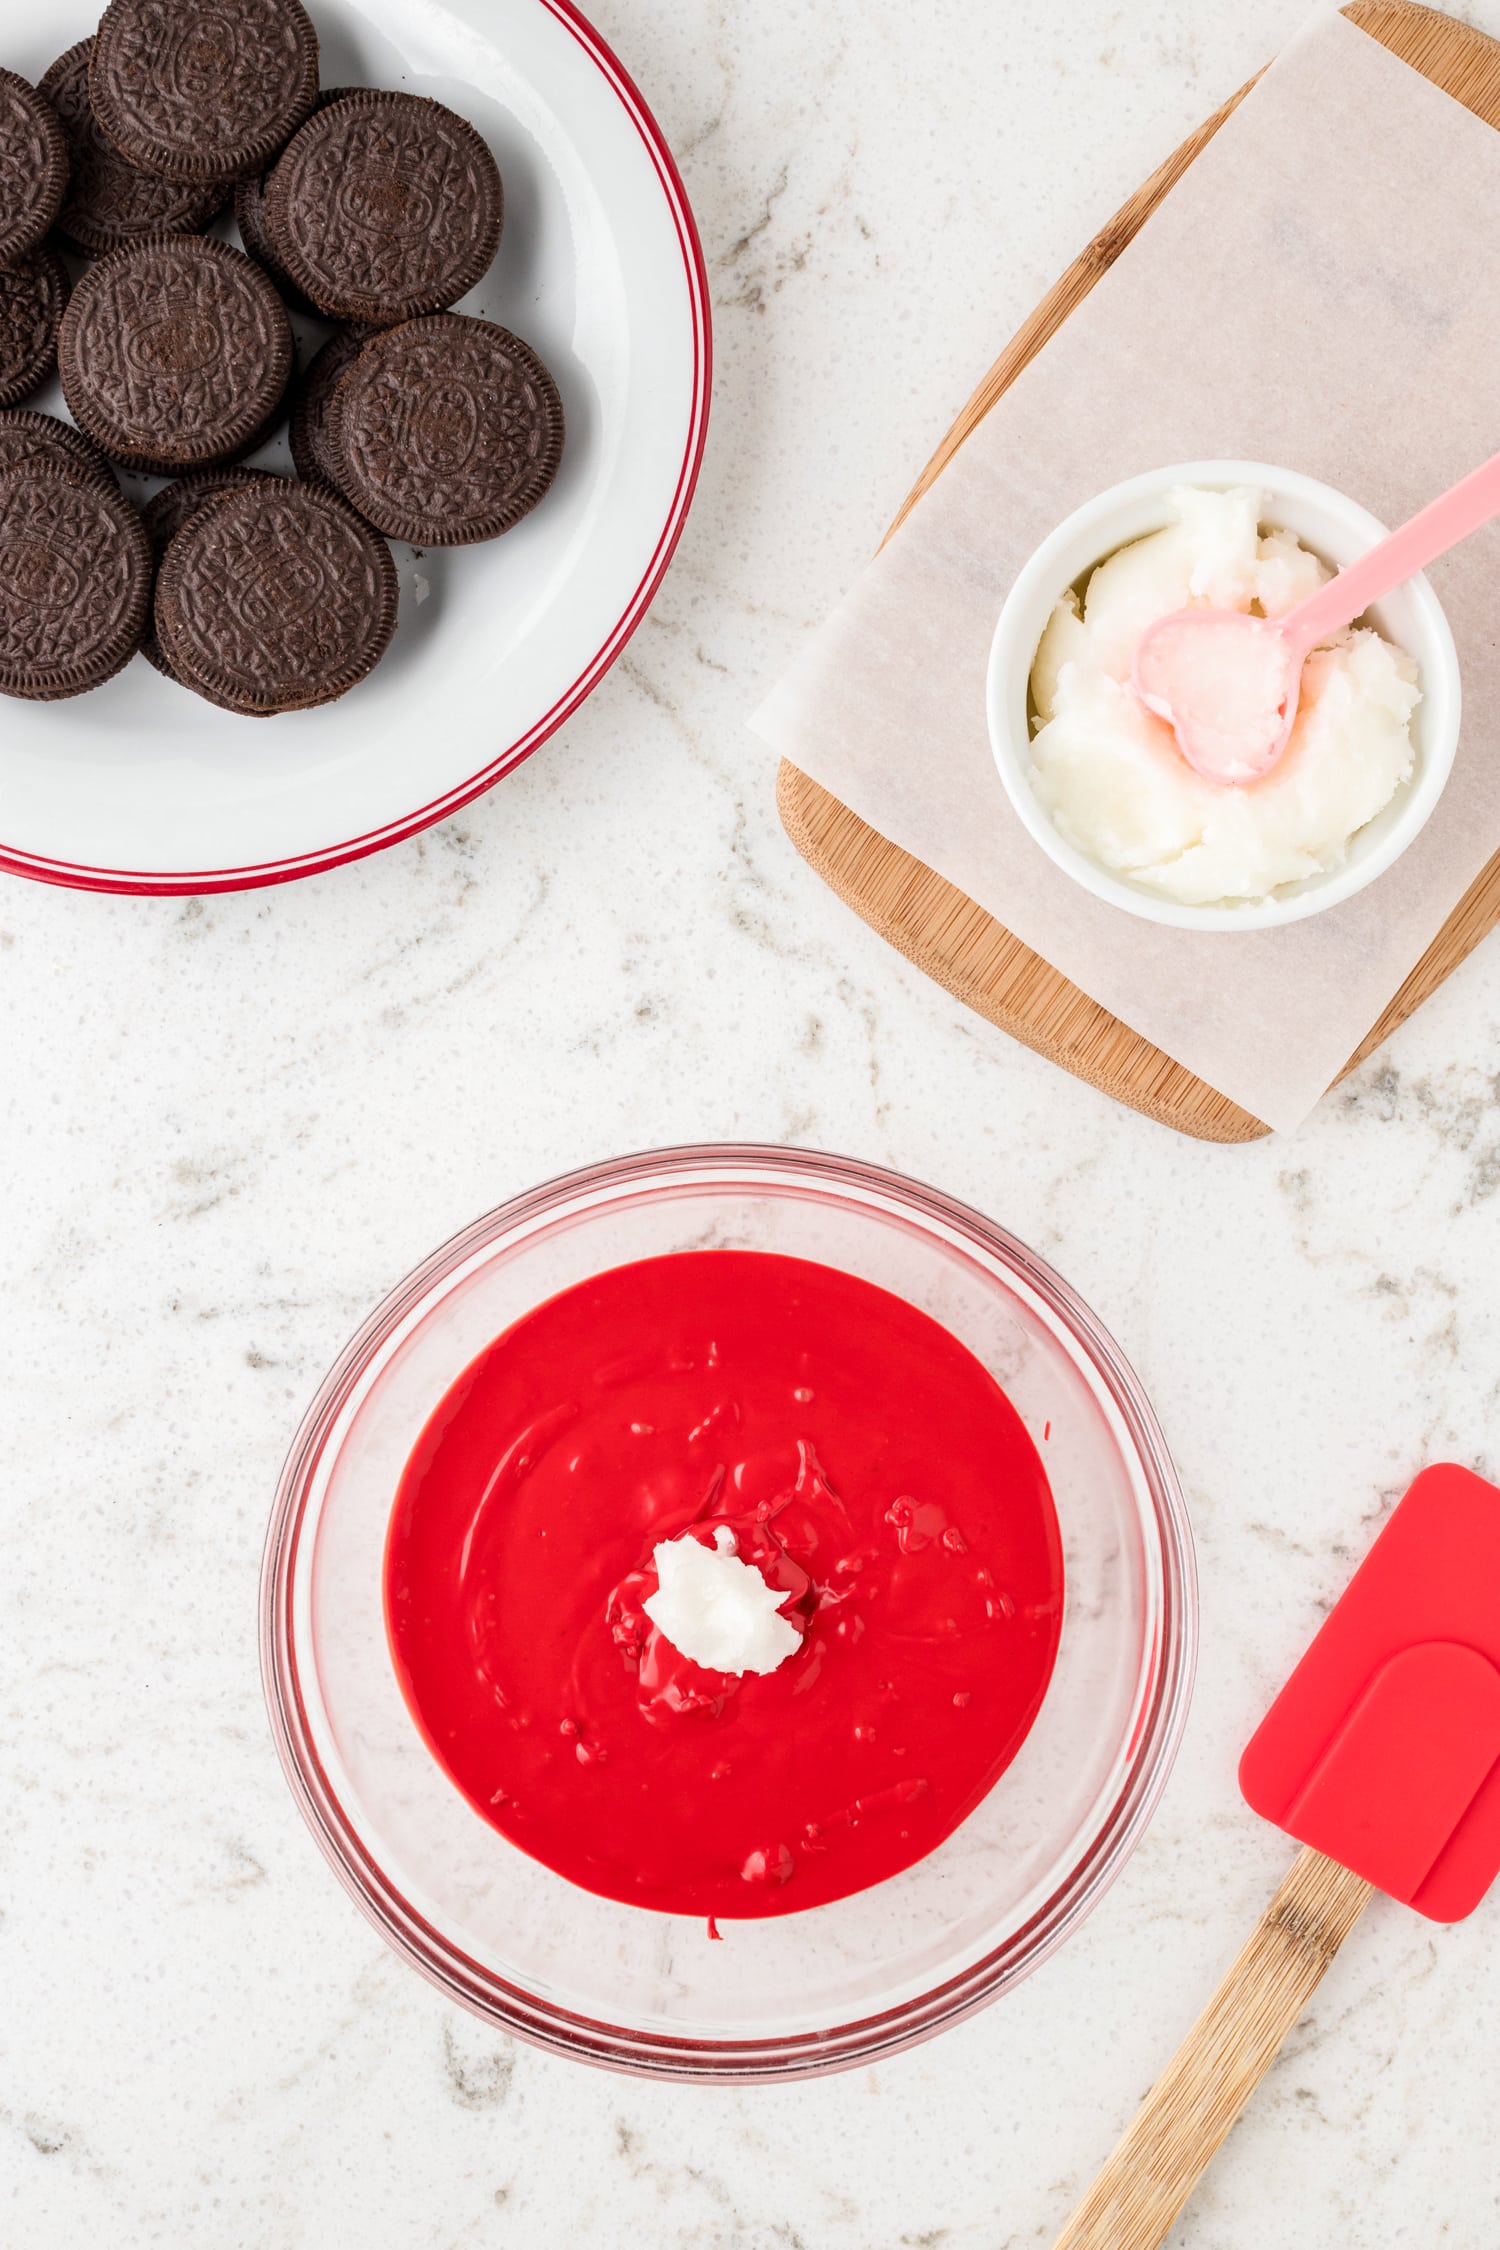 Adding coconut oil to red candy melt for Lady Bug Oreos recipe